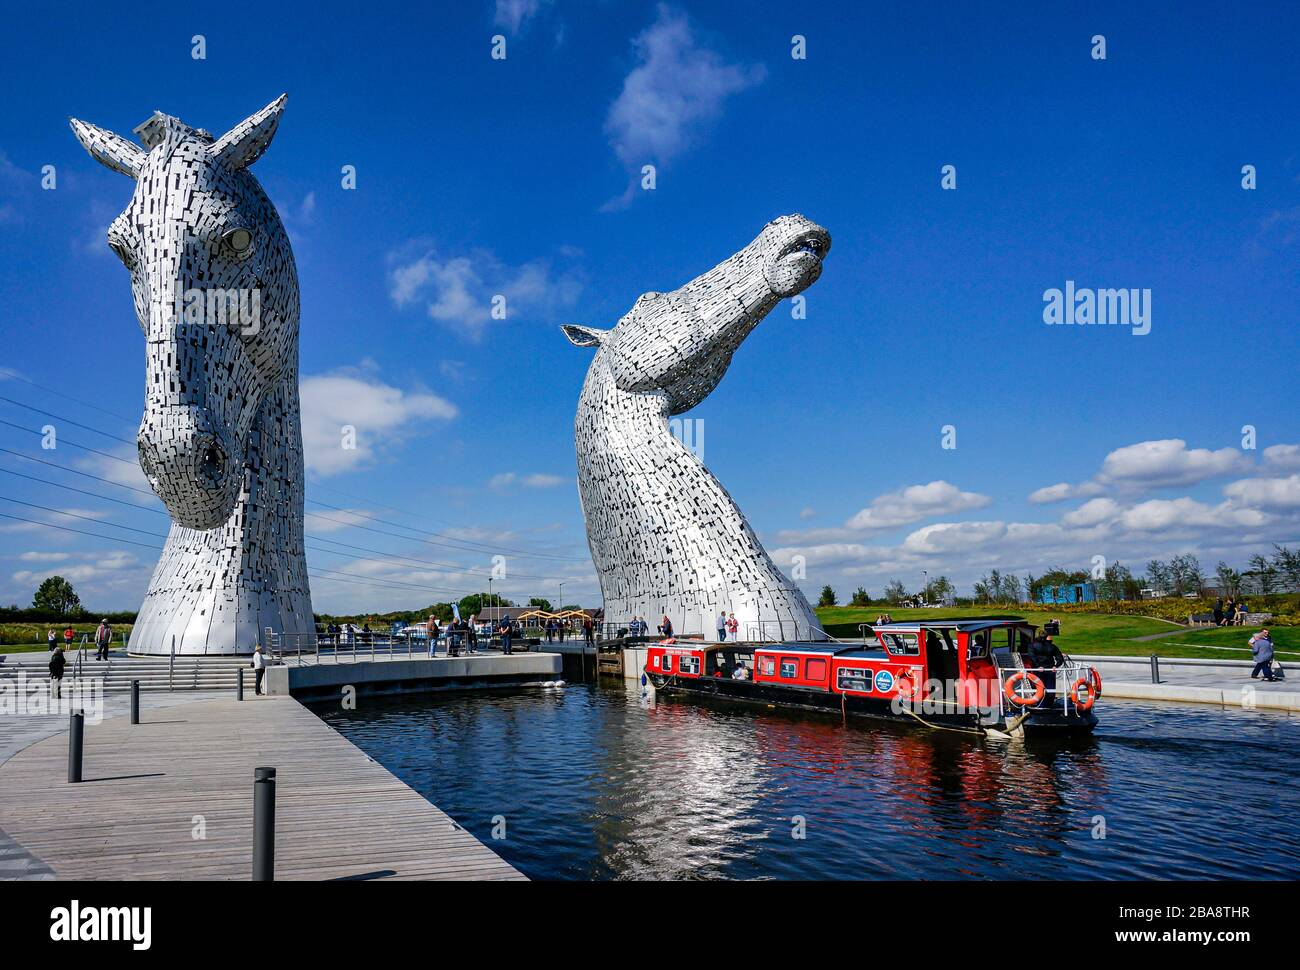 Canal boat Wooden Spoon Seagull has turned in the basin at The Kelpies at The Helix park in Falkirk Scotland Stock Photo